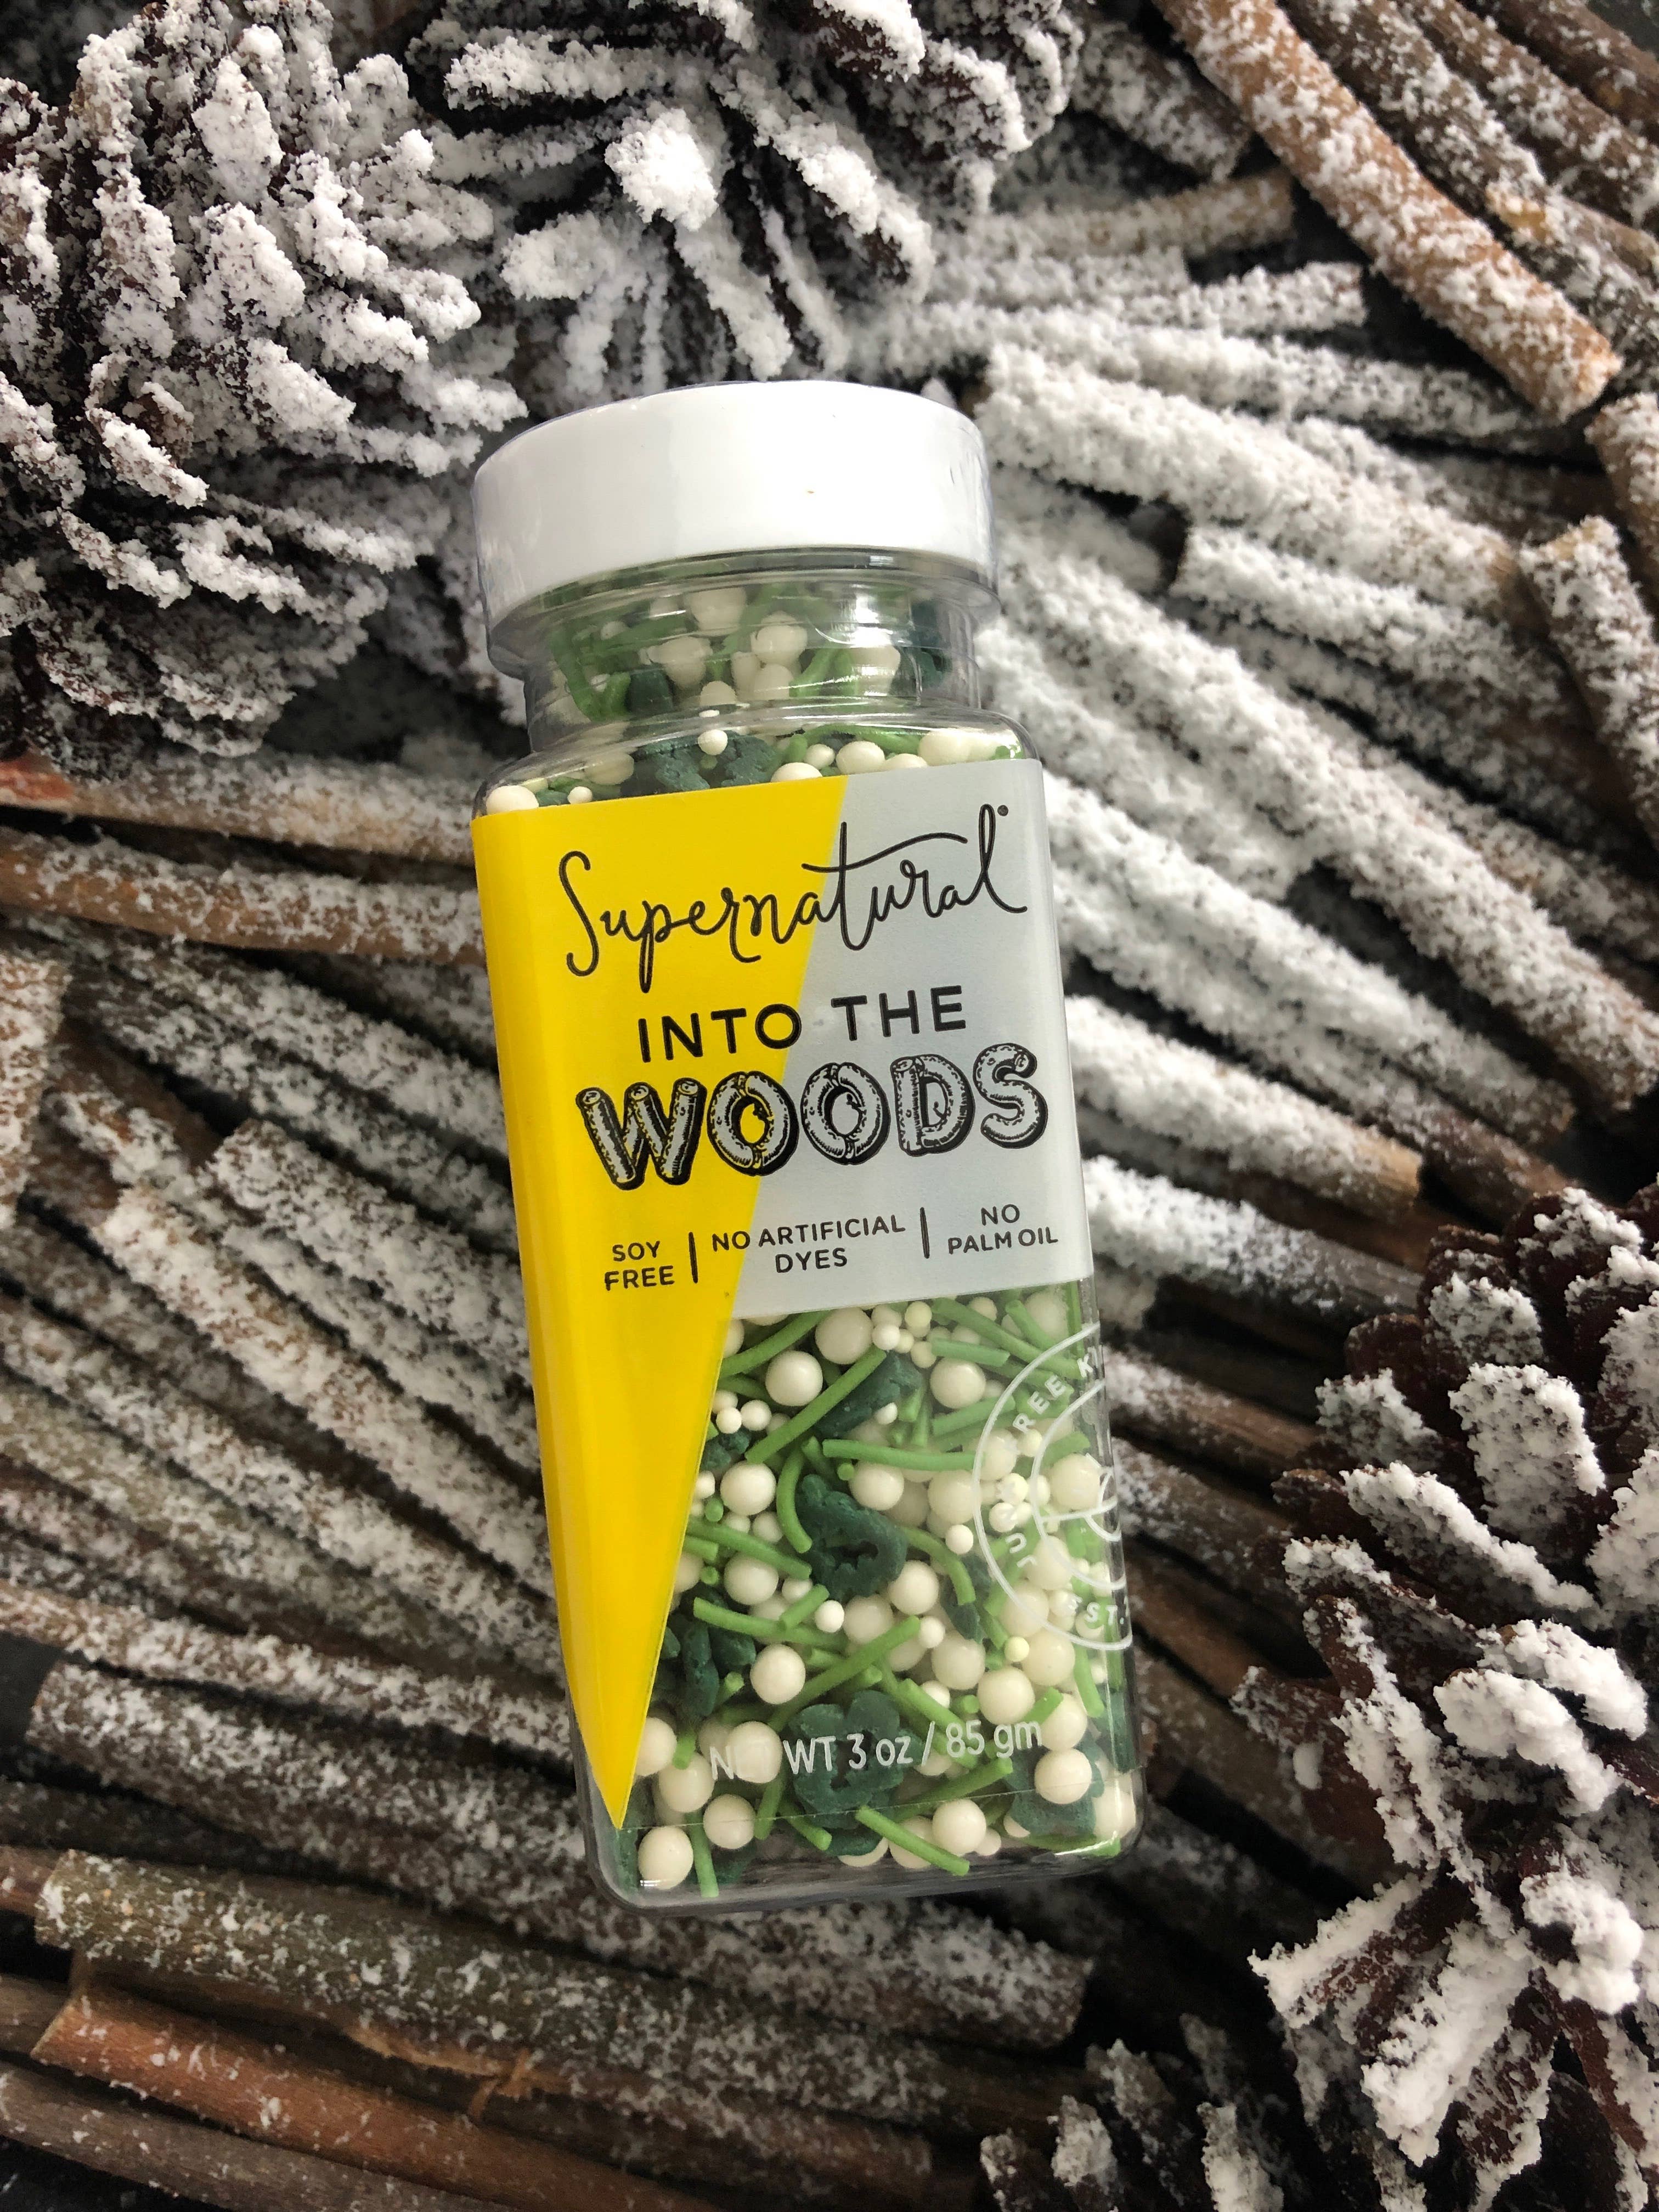 Dye-Free Into The Woods Sprinkles